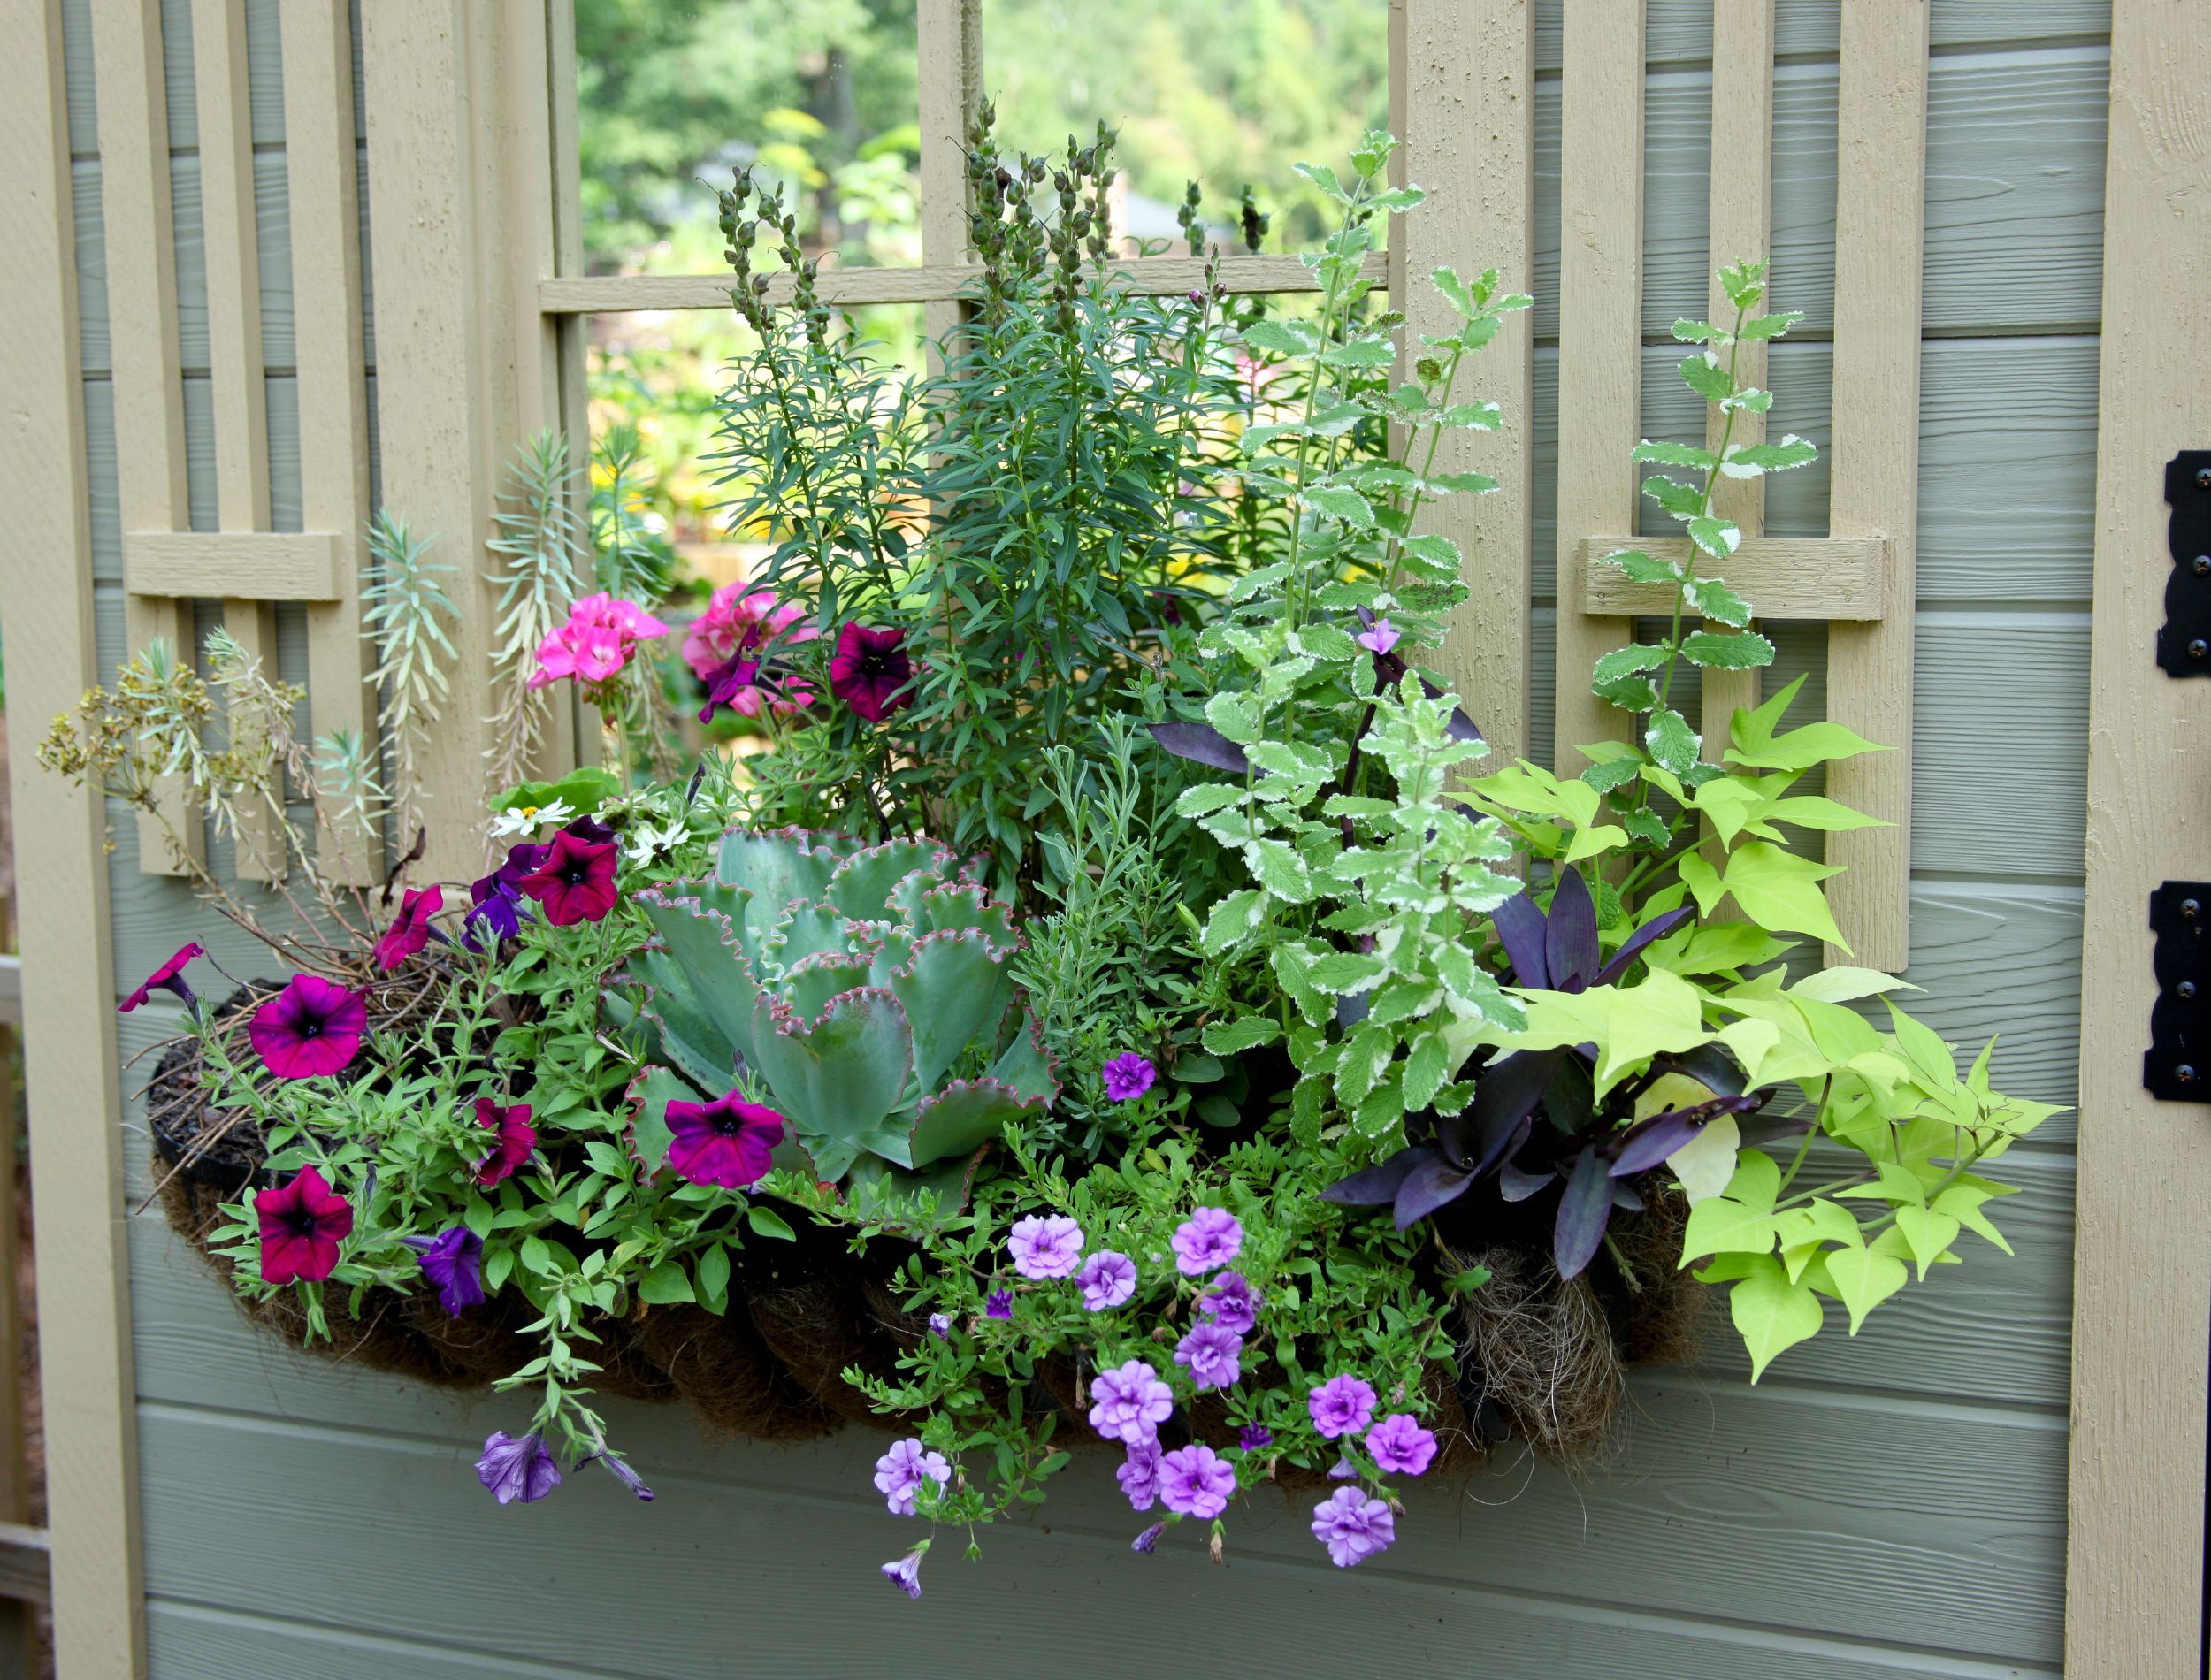 Window box with flowers blooming